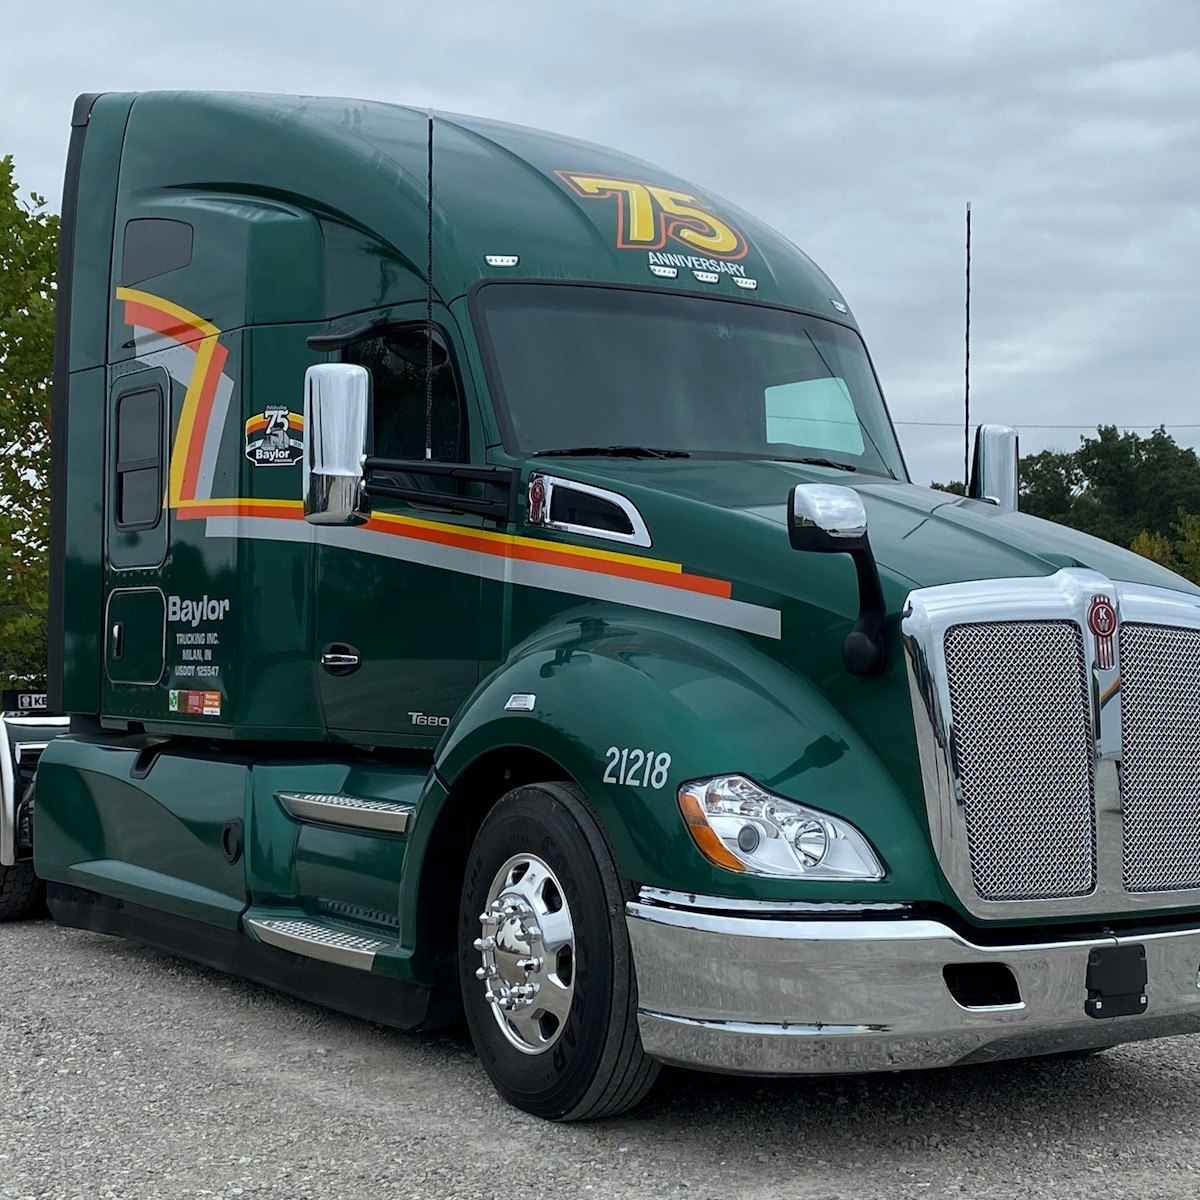 Baylor Trucking acquired by Werner